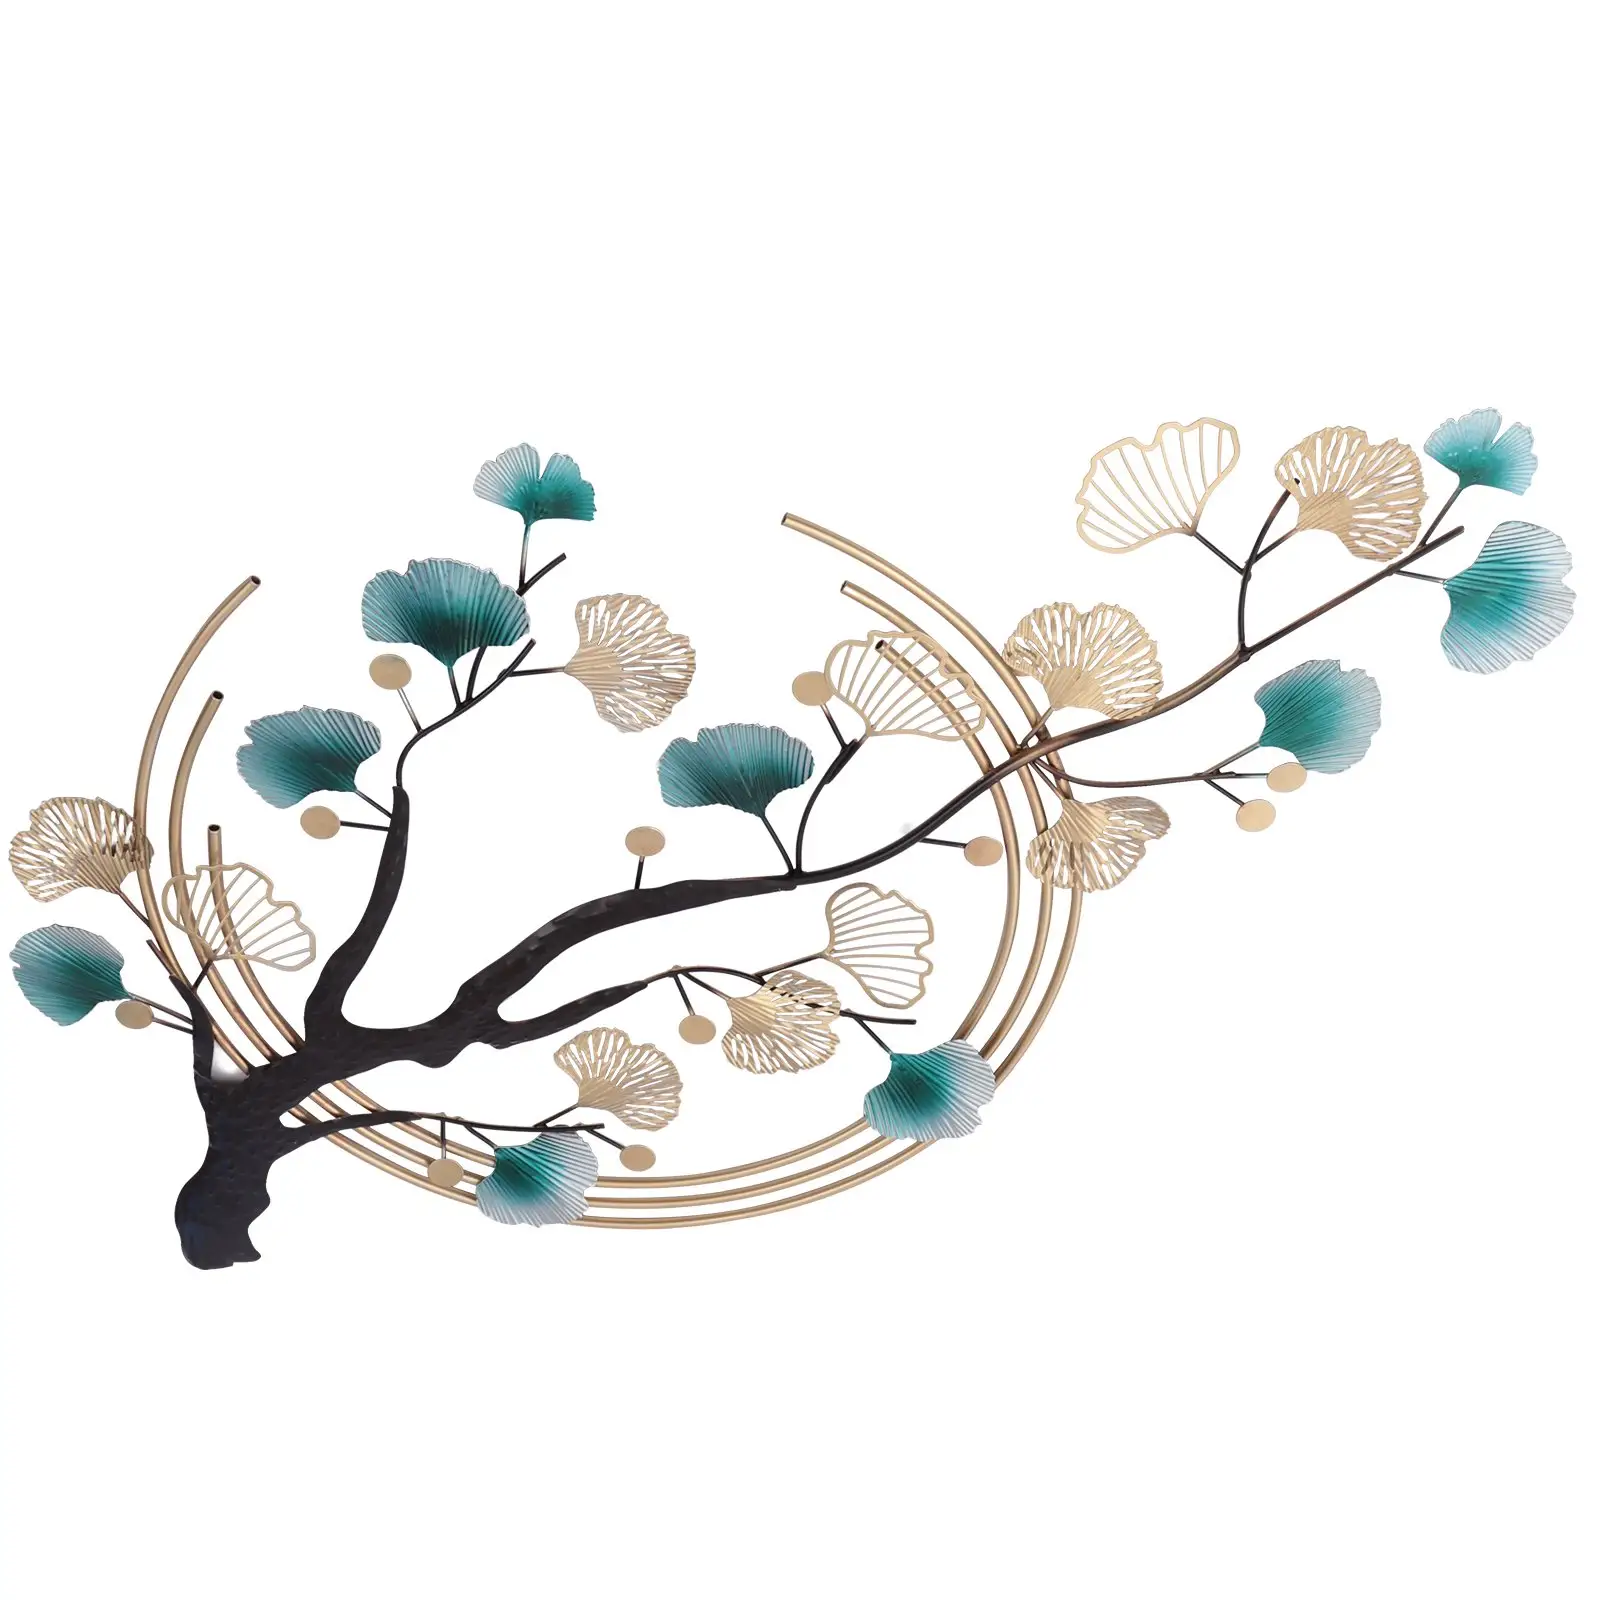 Tree With Ginkgo Leaf Metal Wall Deco Create A Great Focal Point And A Touch Of Luxury With This Floral Art In Any Interior Area